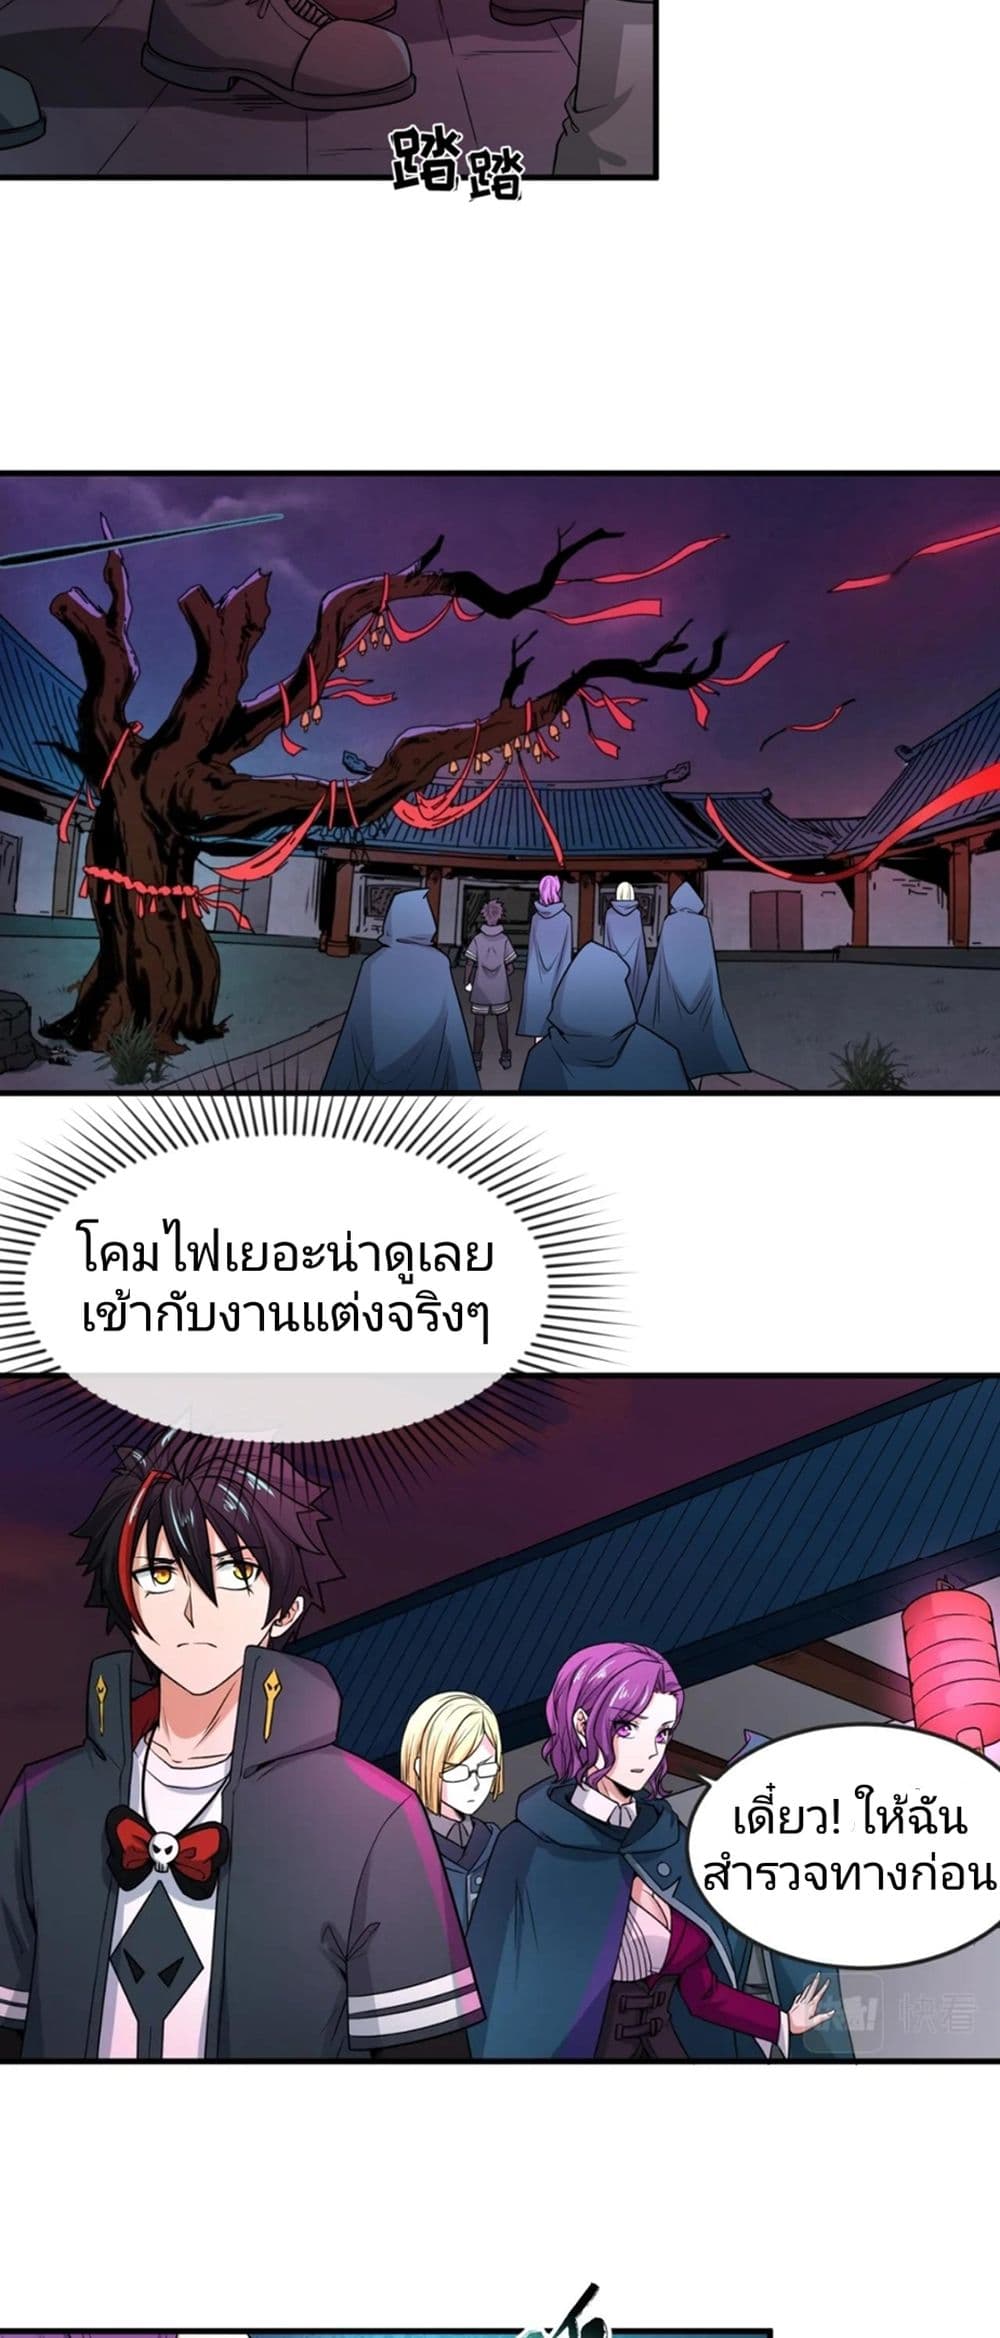 The Age of Ghost Spirits à¸à¸­à¸à¸à¸µà¹ 13 (3)